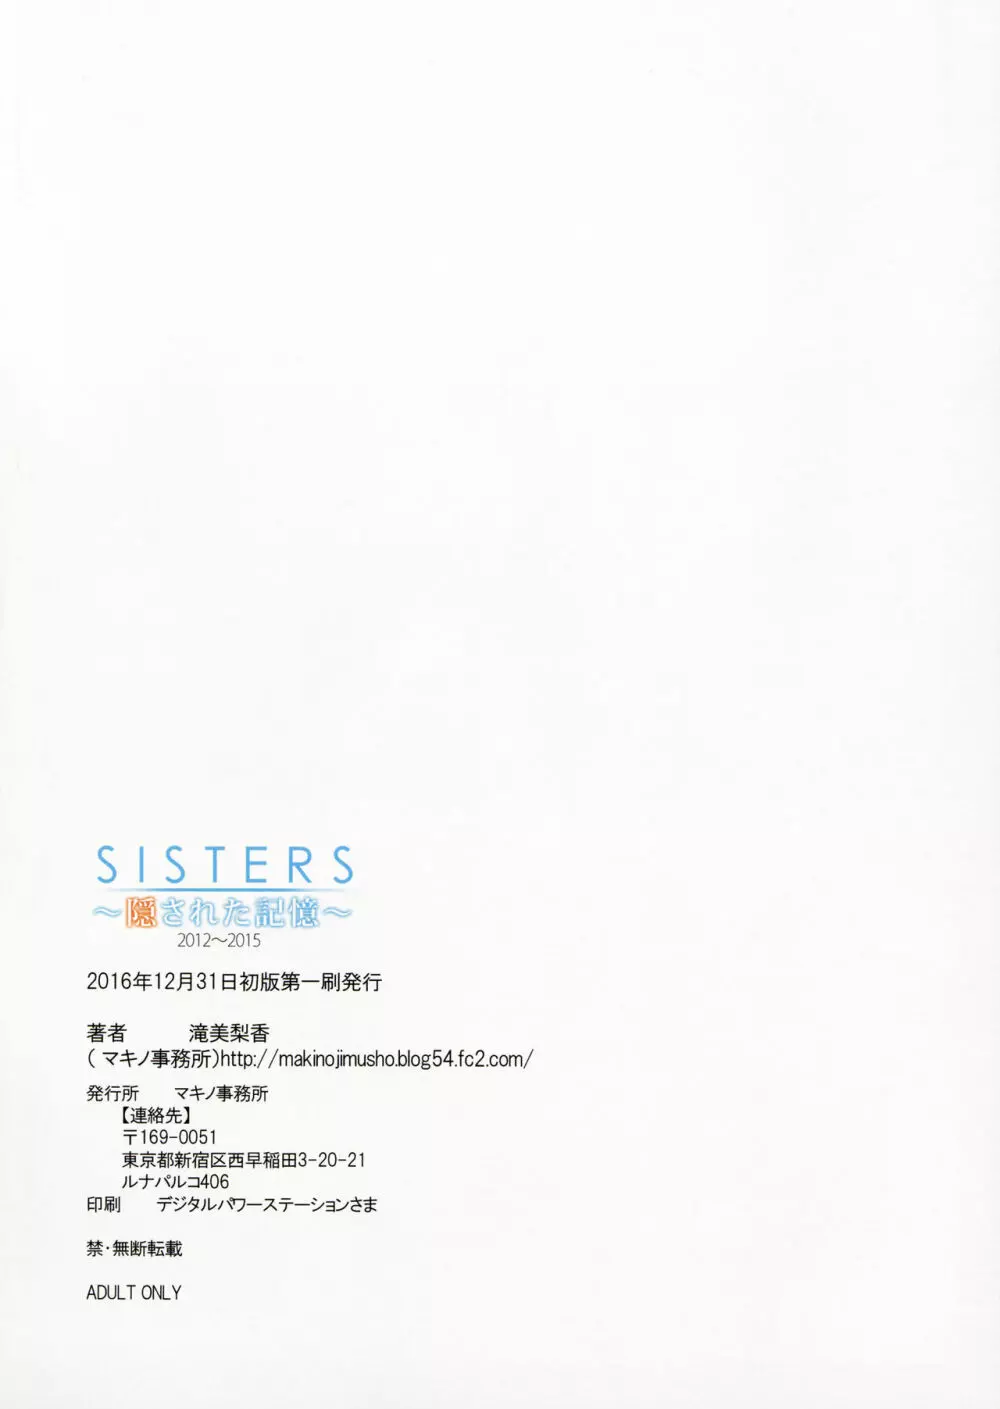 SISTERS ～隠された記憶～ 2012-2015 Page.94